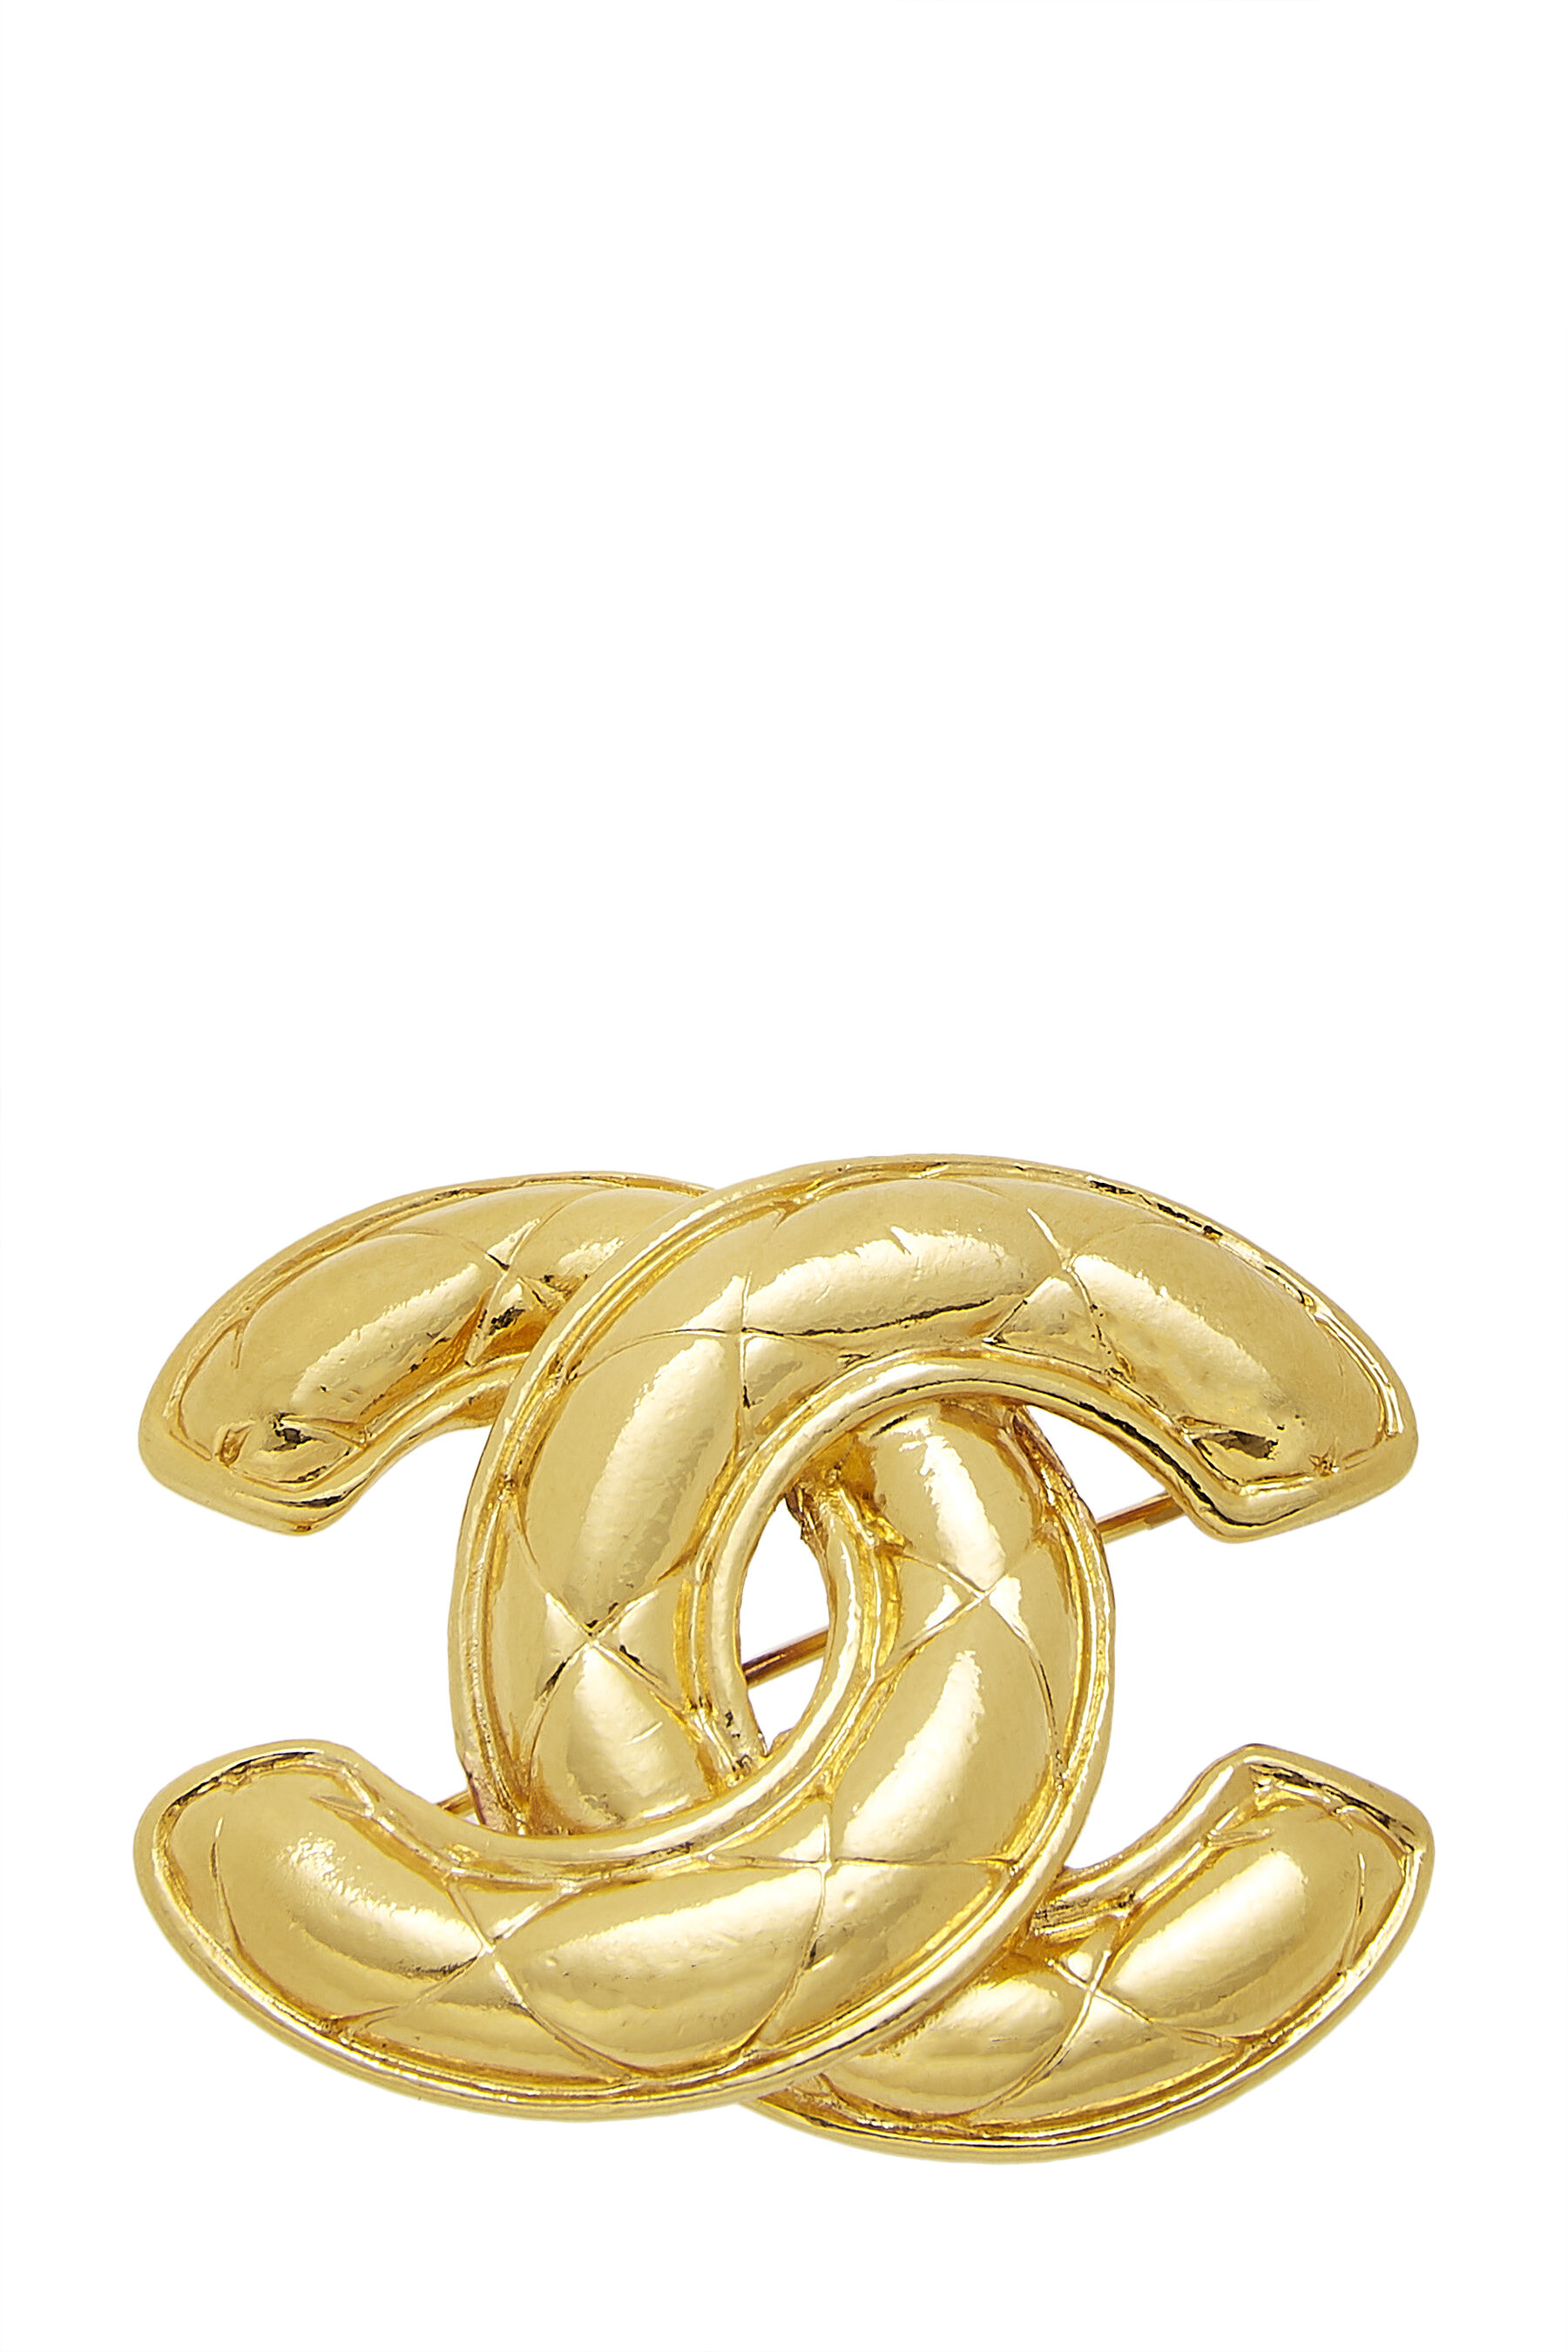 Chanel - Gold Quilted 'CC' Pin Medium